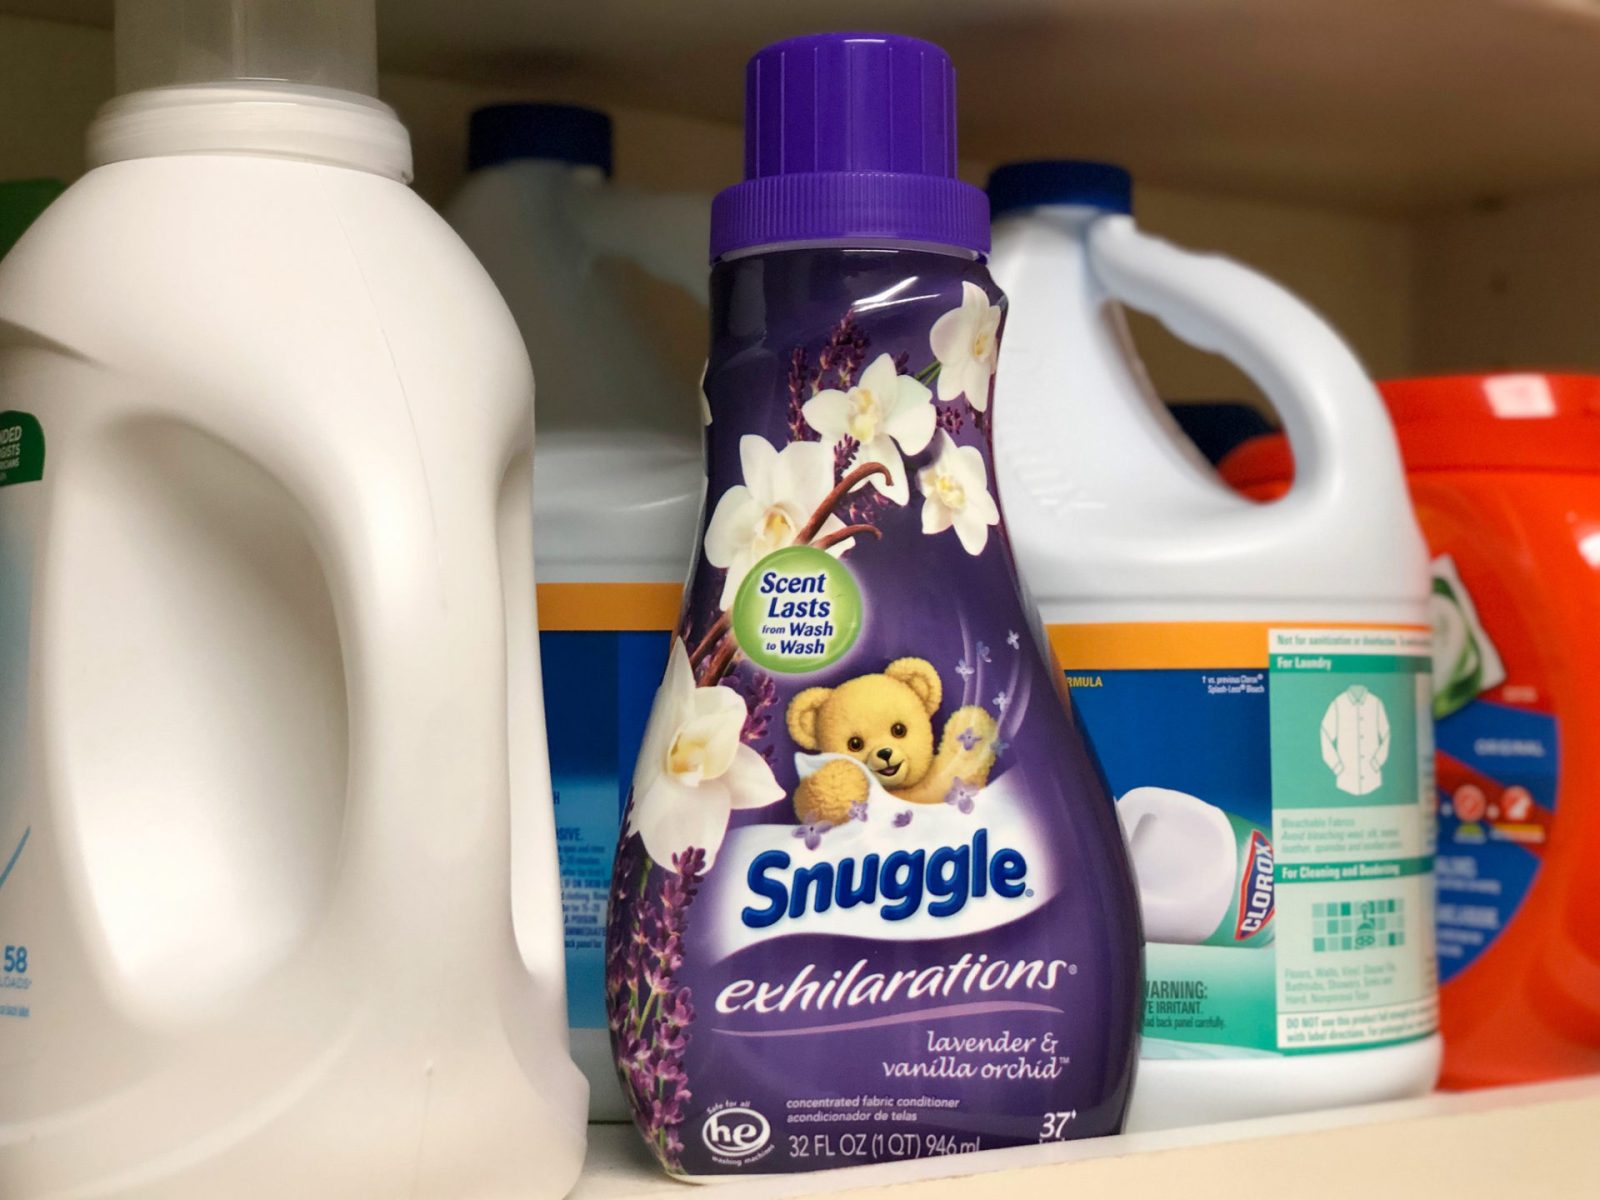 Snuggle Fabric Softener As Low As $1.19 At Kroger